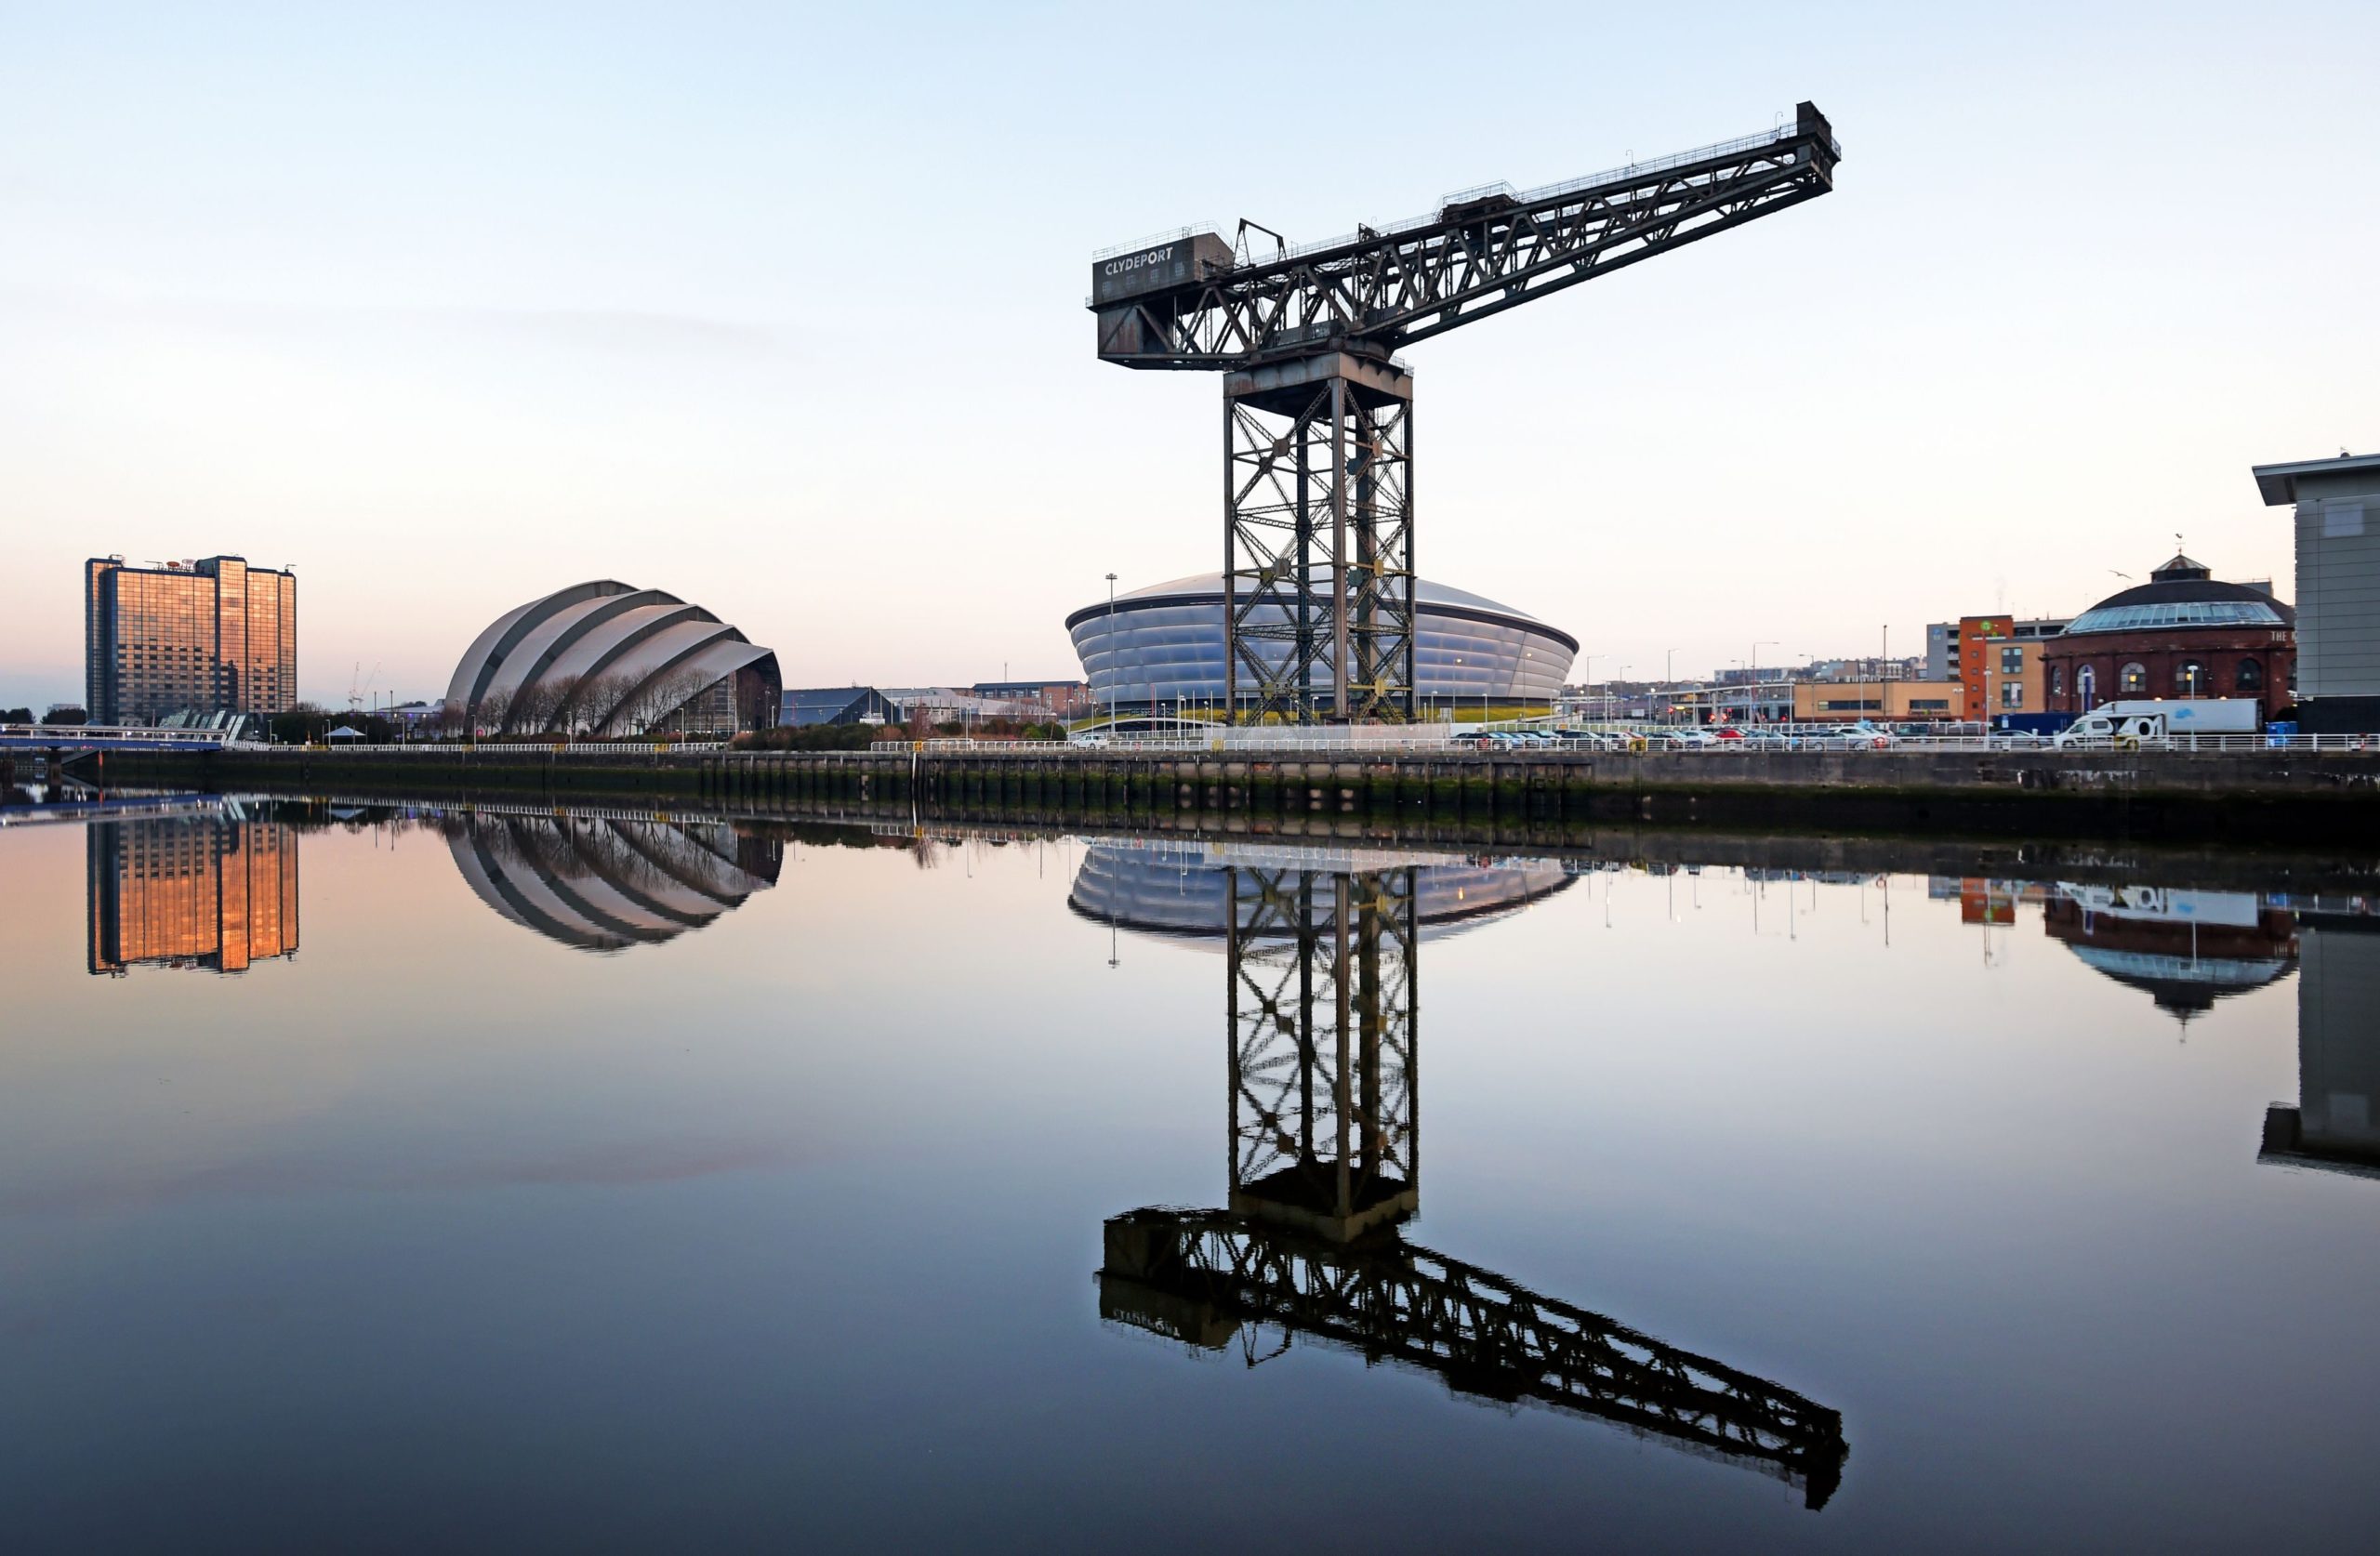 The Finnieston Crane sits alongside other Glasgow landmarks including the Armadillo and SSE Hydro